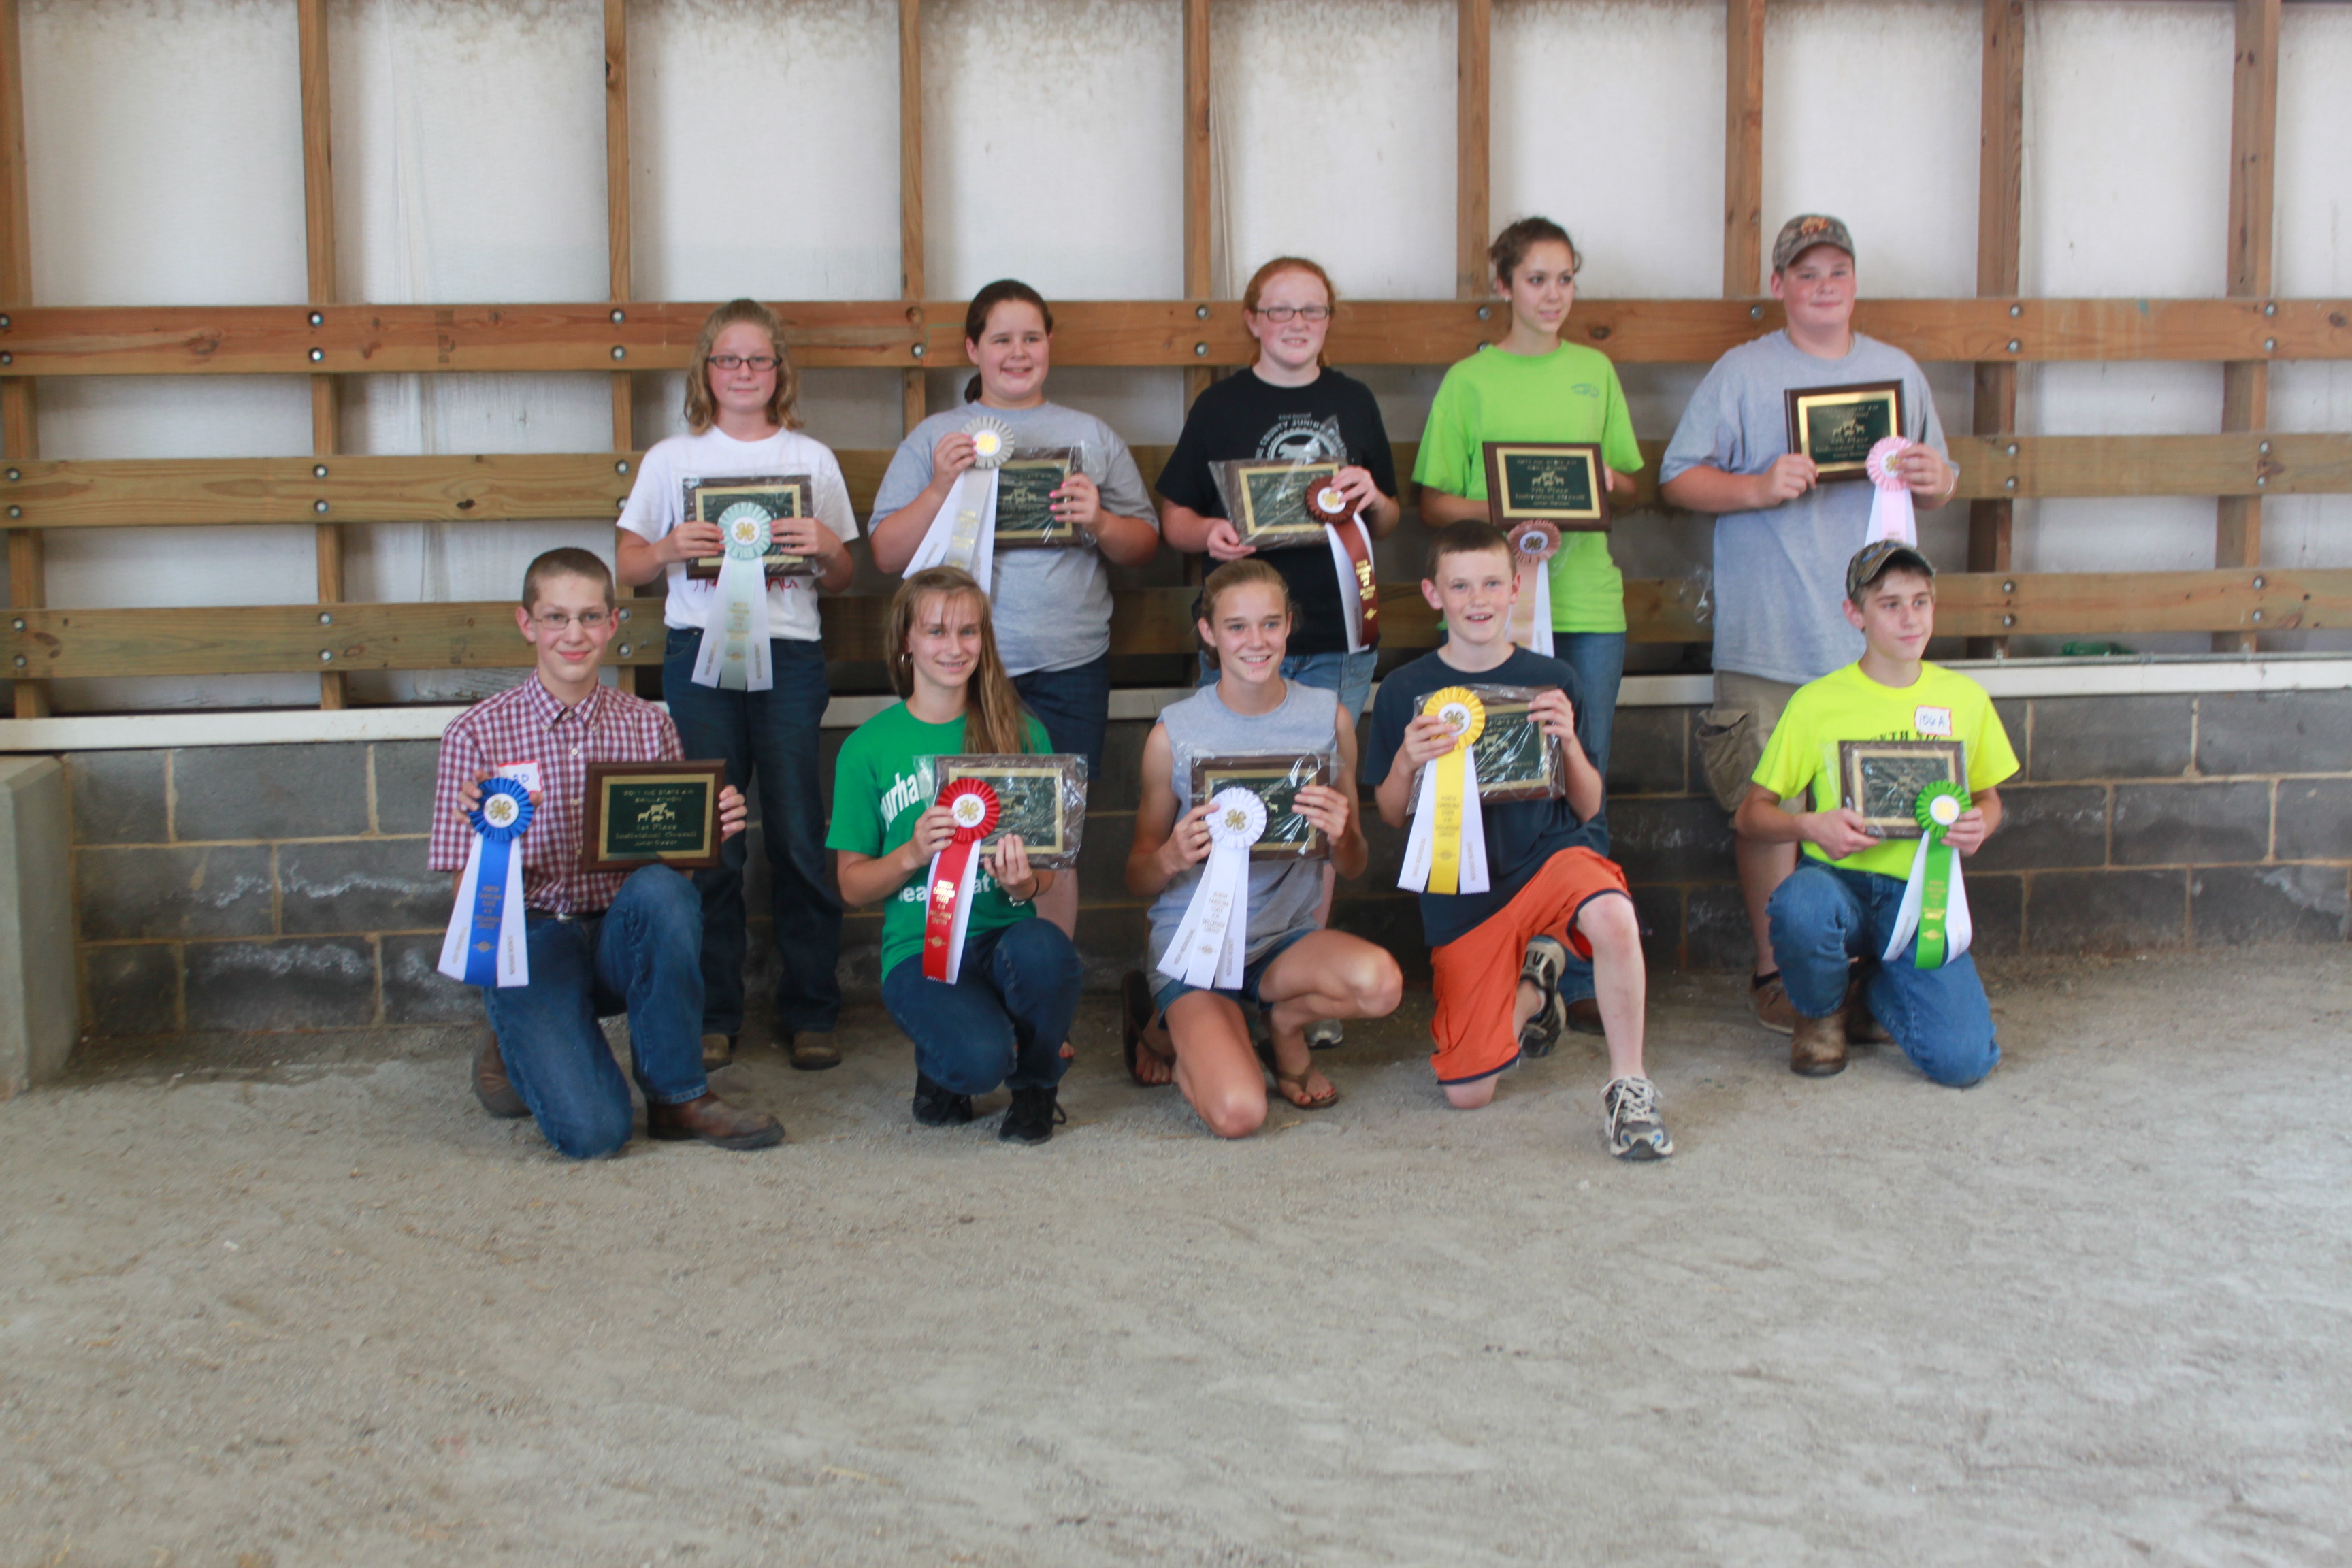 Children in a barn posing with appreciation plaques and ribbons.